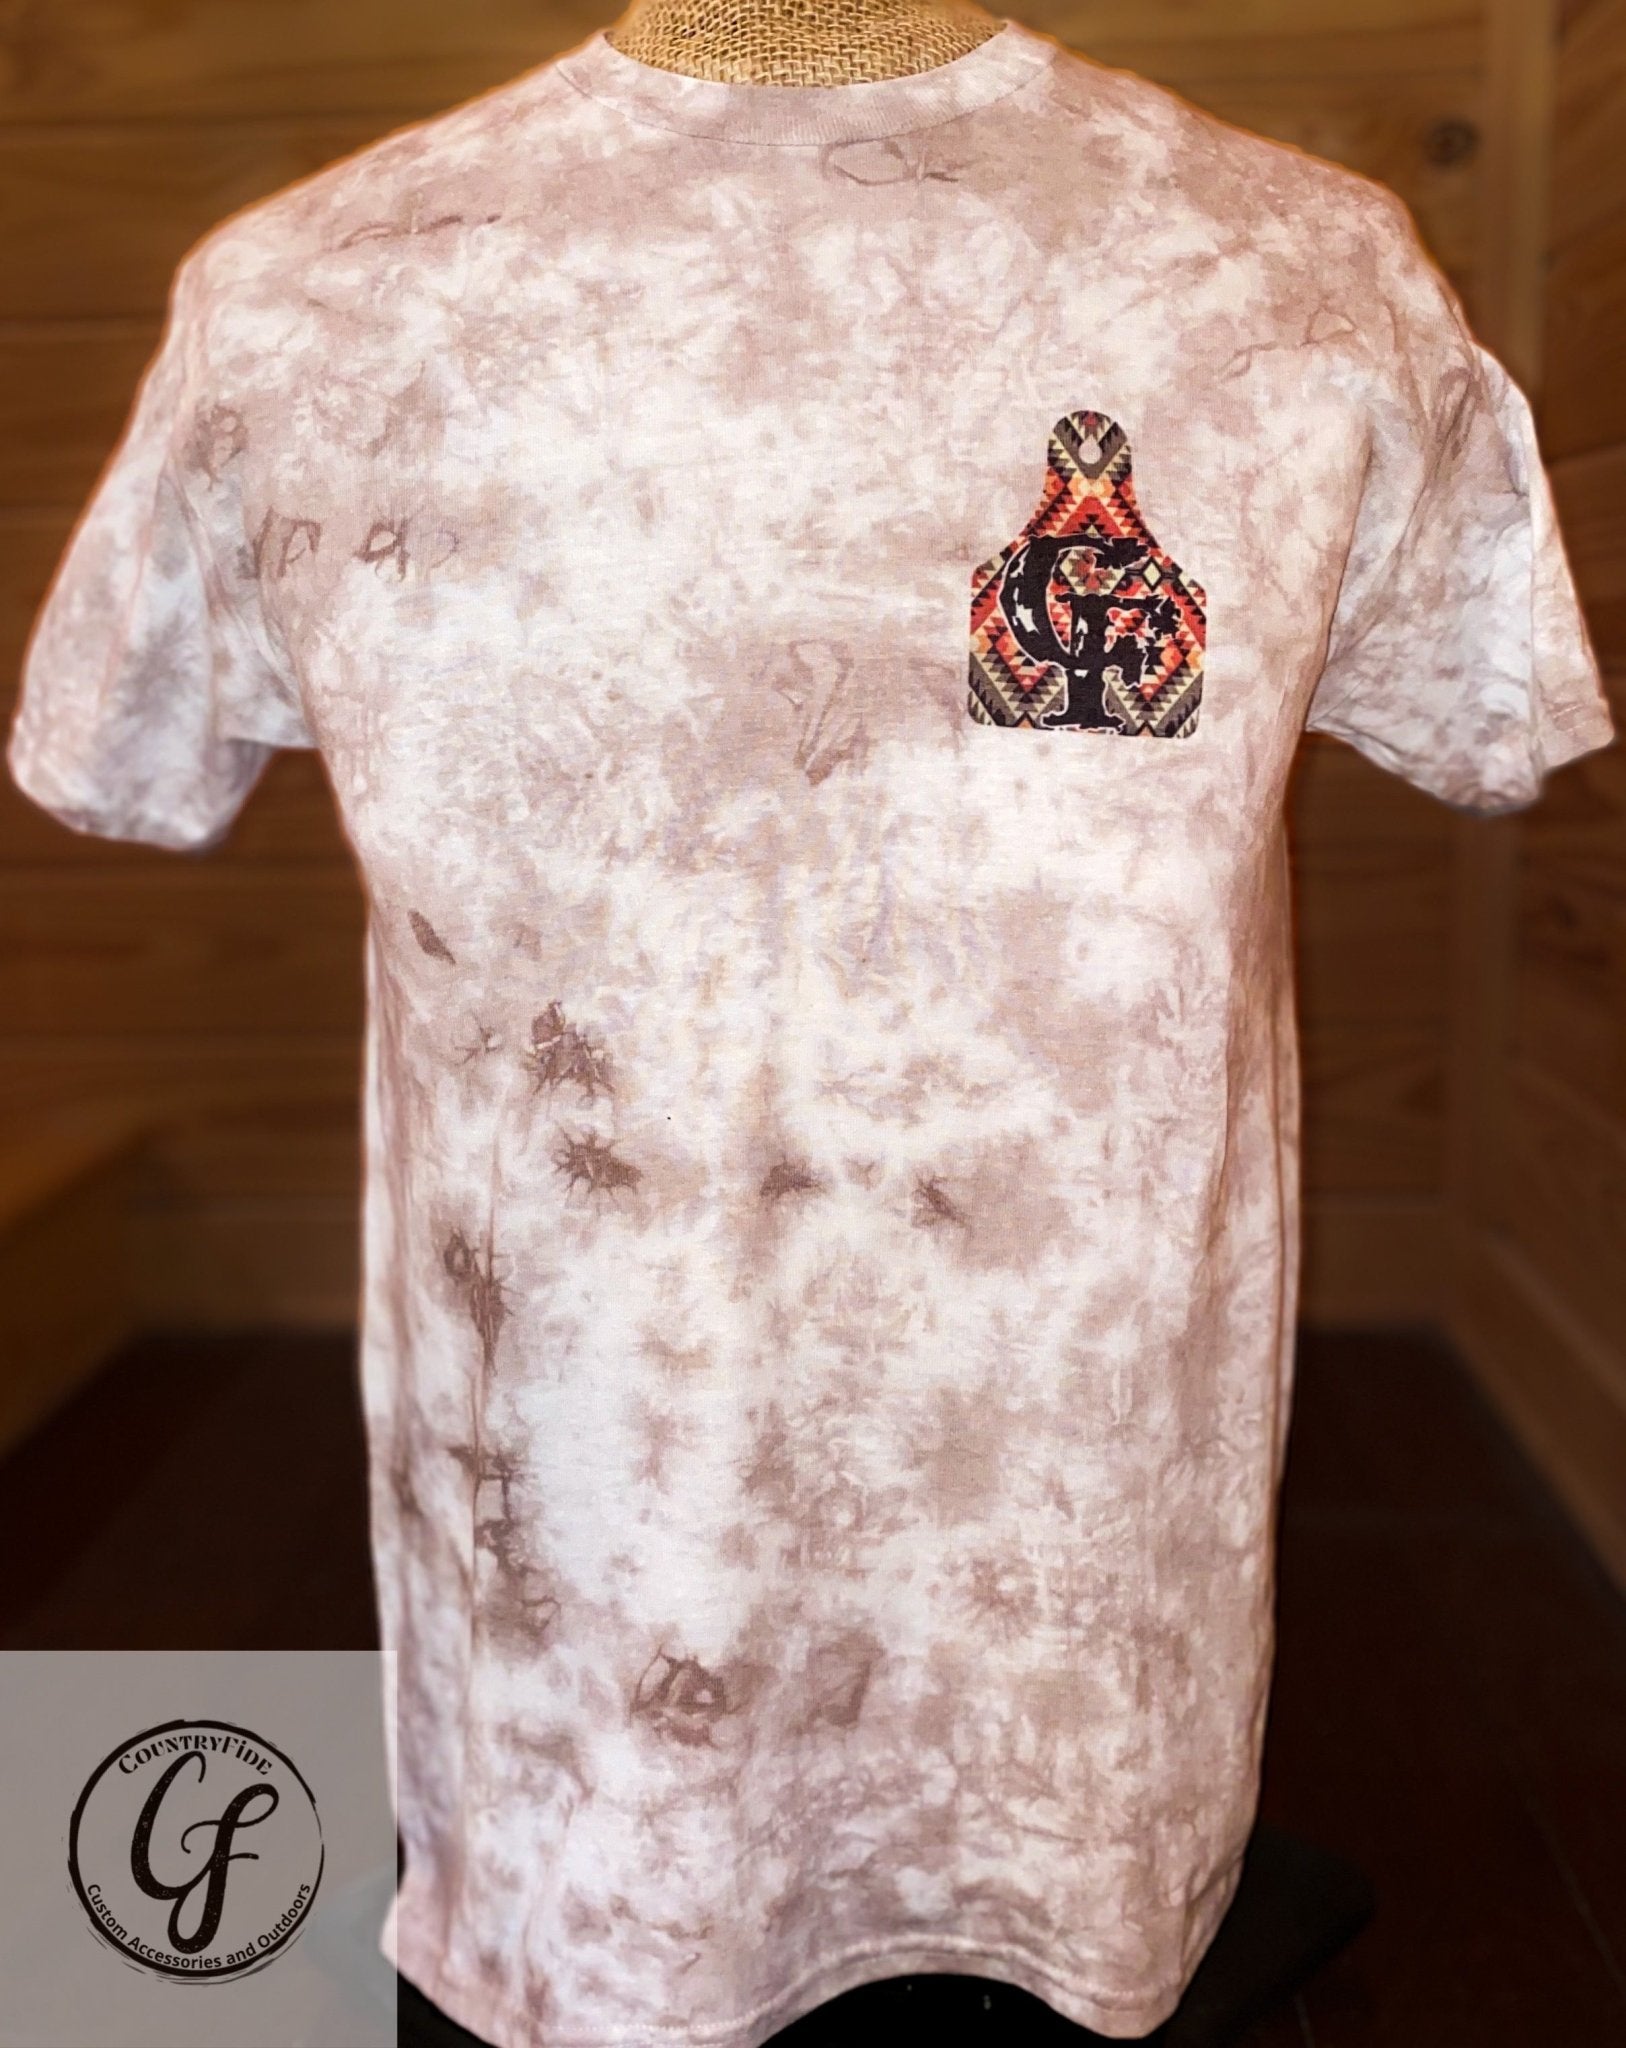 CF AZTEC COW TAG BRANDED TIE DYE TEE - CountryFide Custom Accessories and Outdoors